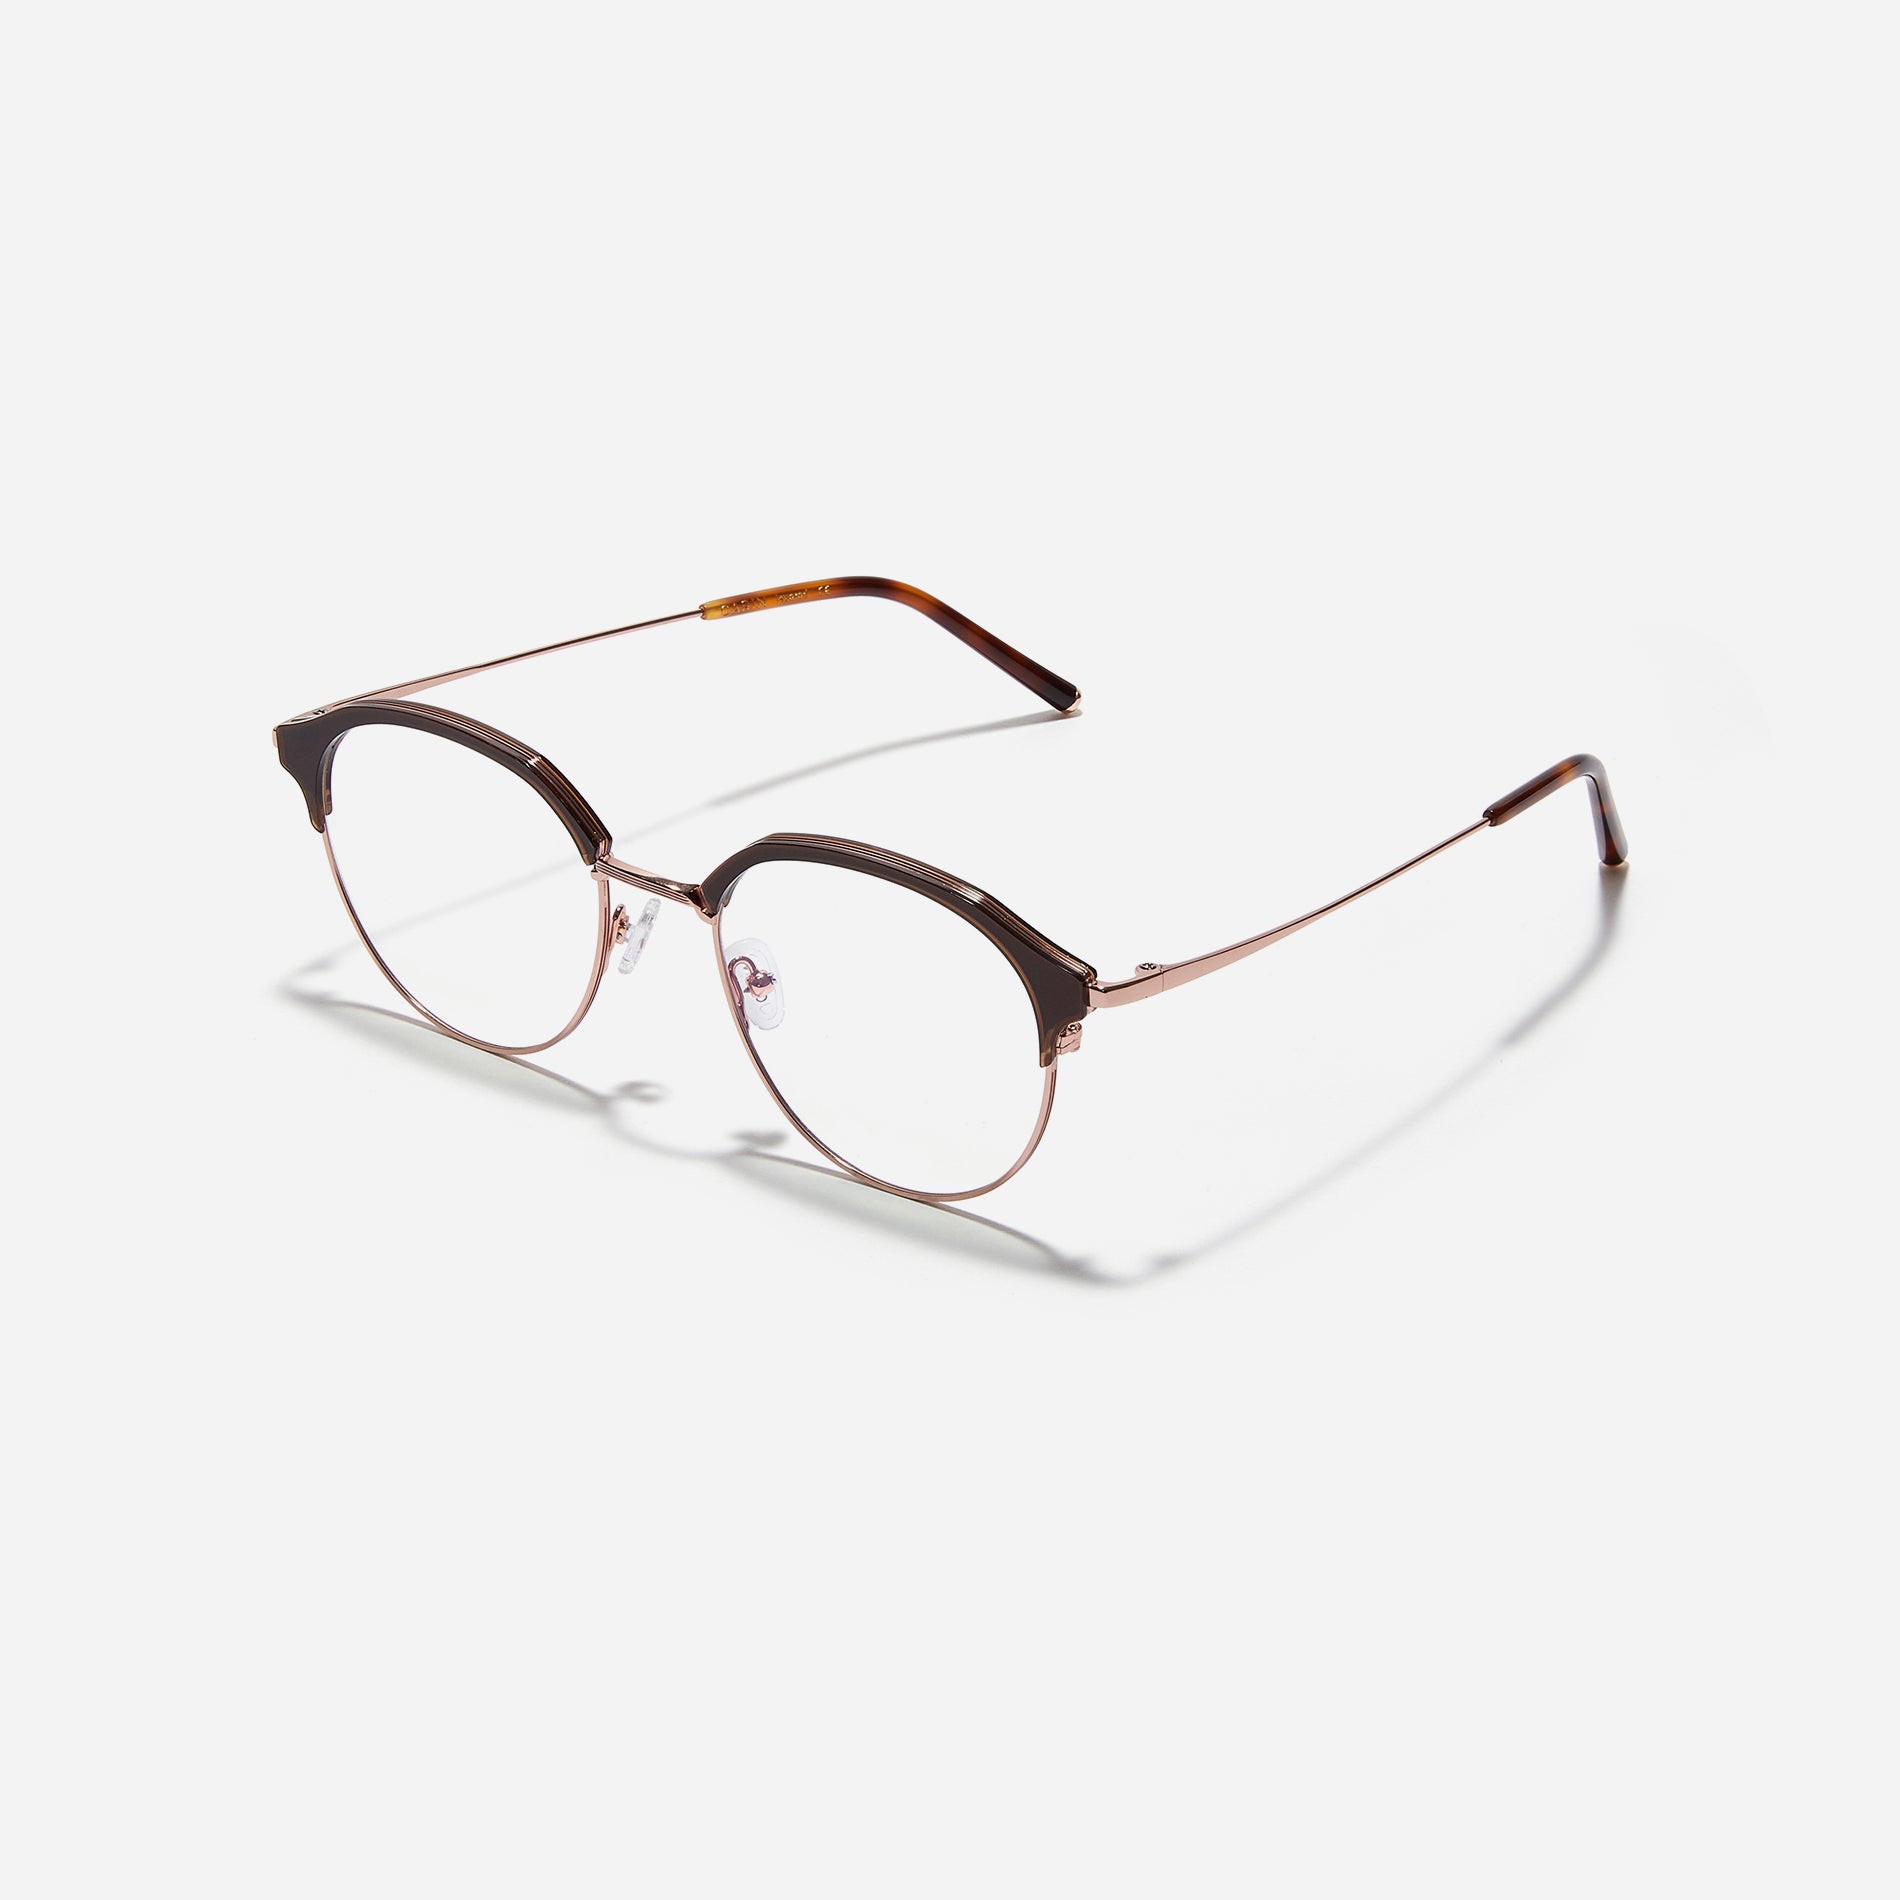 Oversized, round-shaped eyeglasses with a semi-rimless structure ideal for trendy styling and versatile wear.